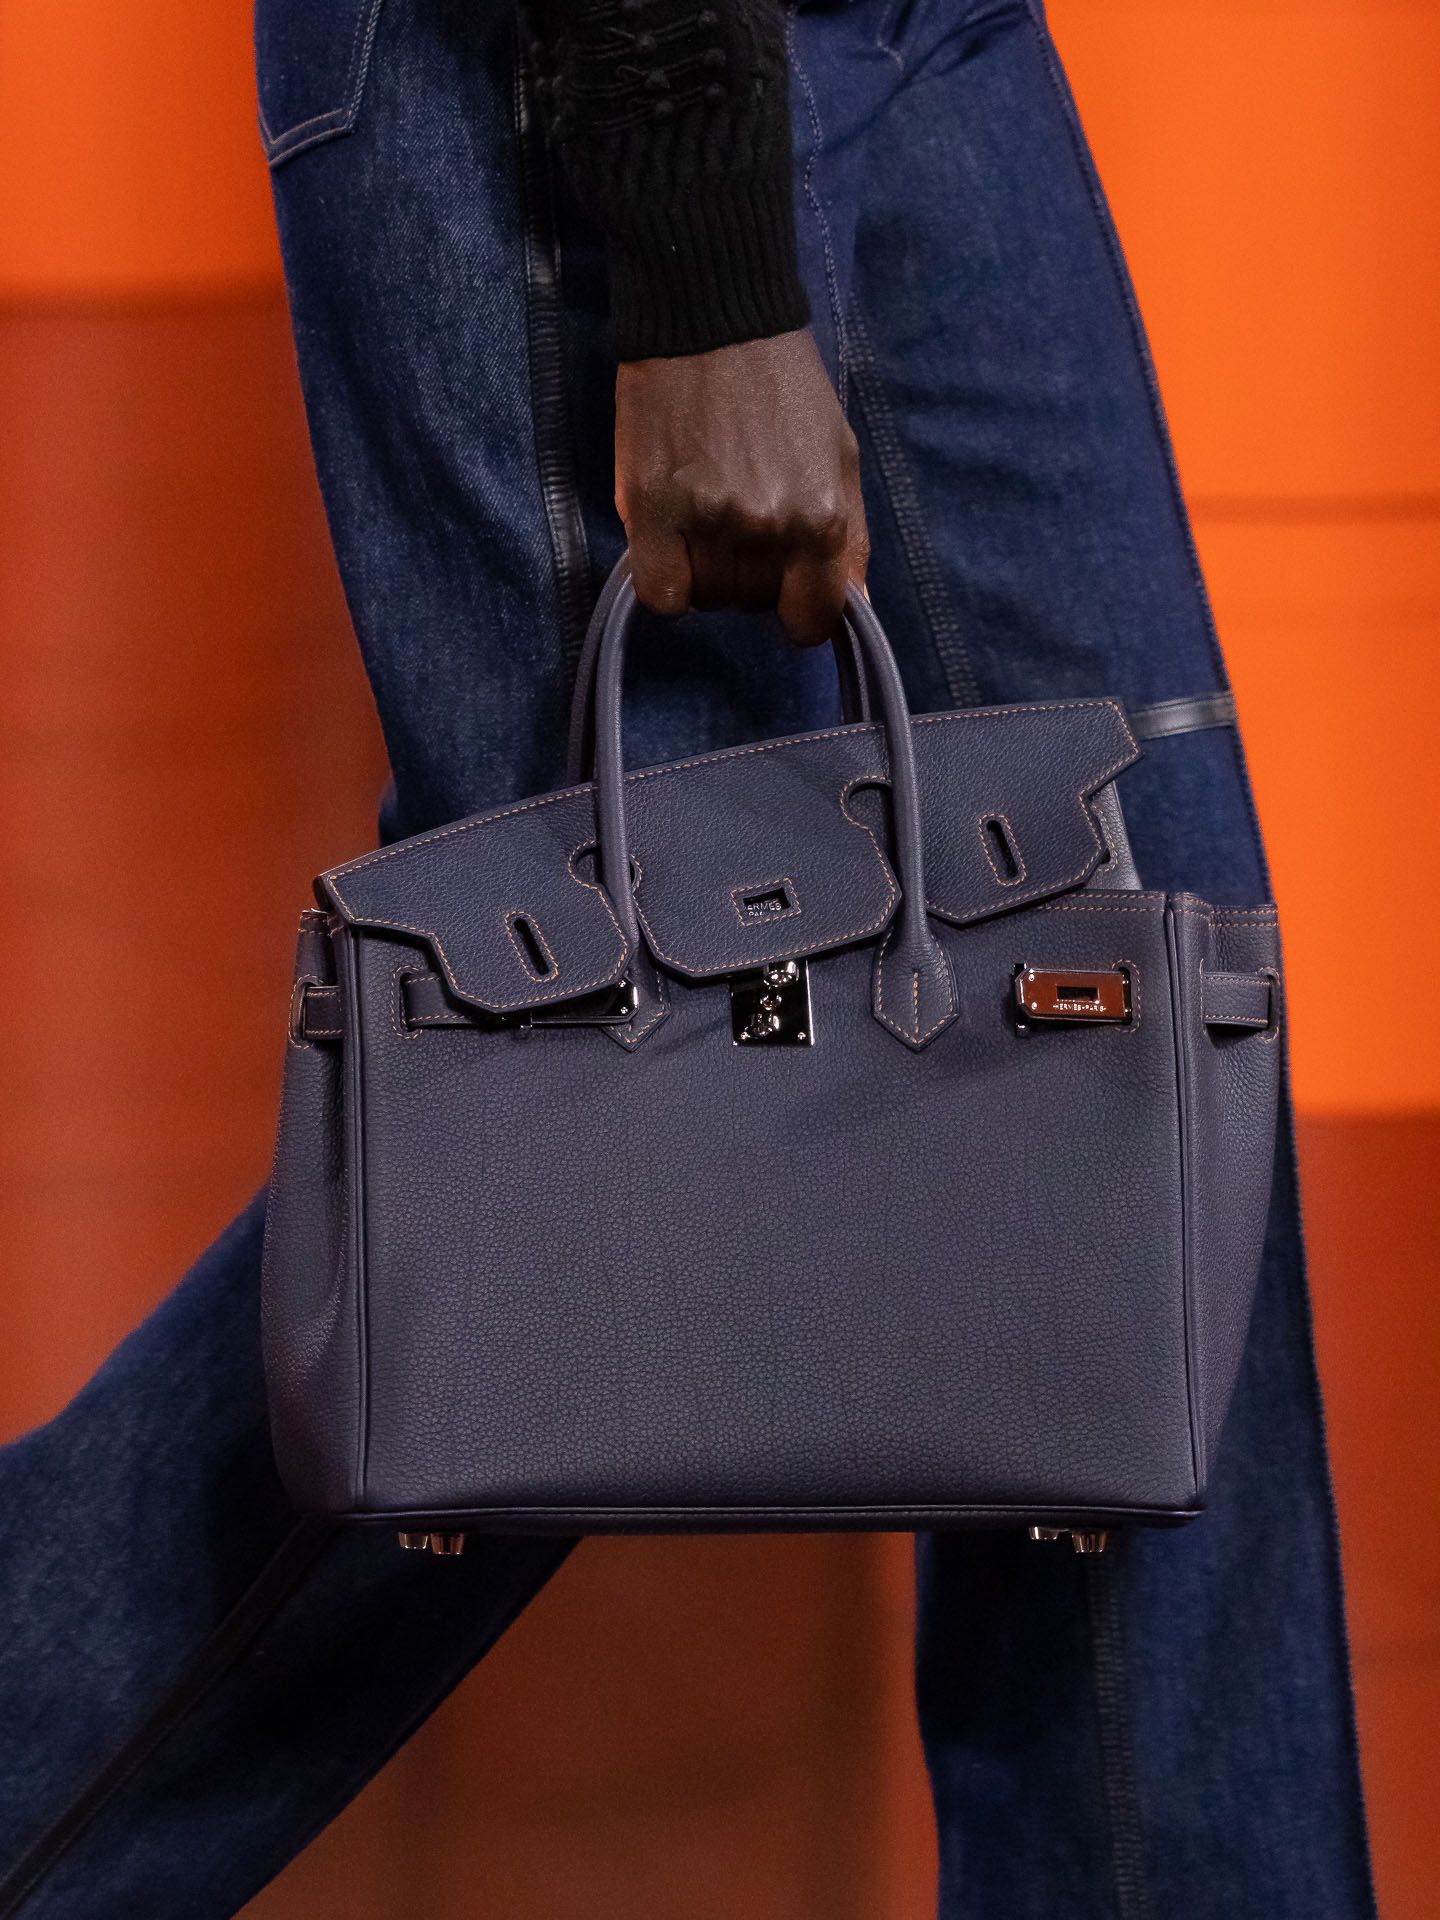 Hermès 2021 New Launched 3-in-1 Birkin Bag – Coco Approved Studio